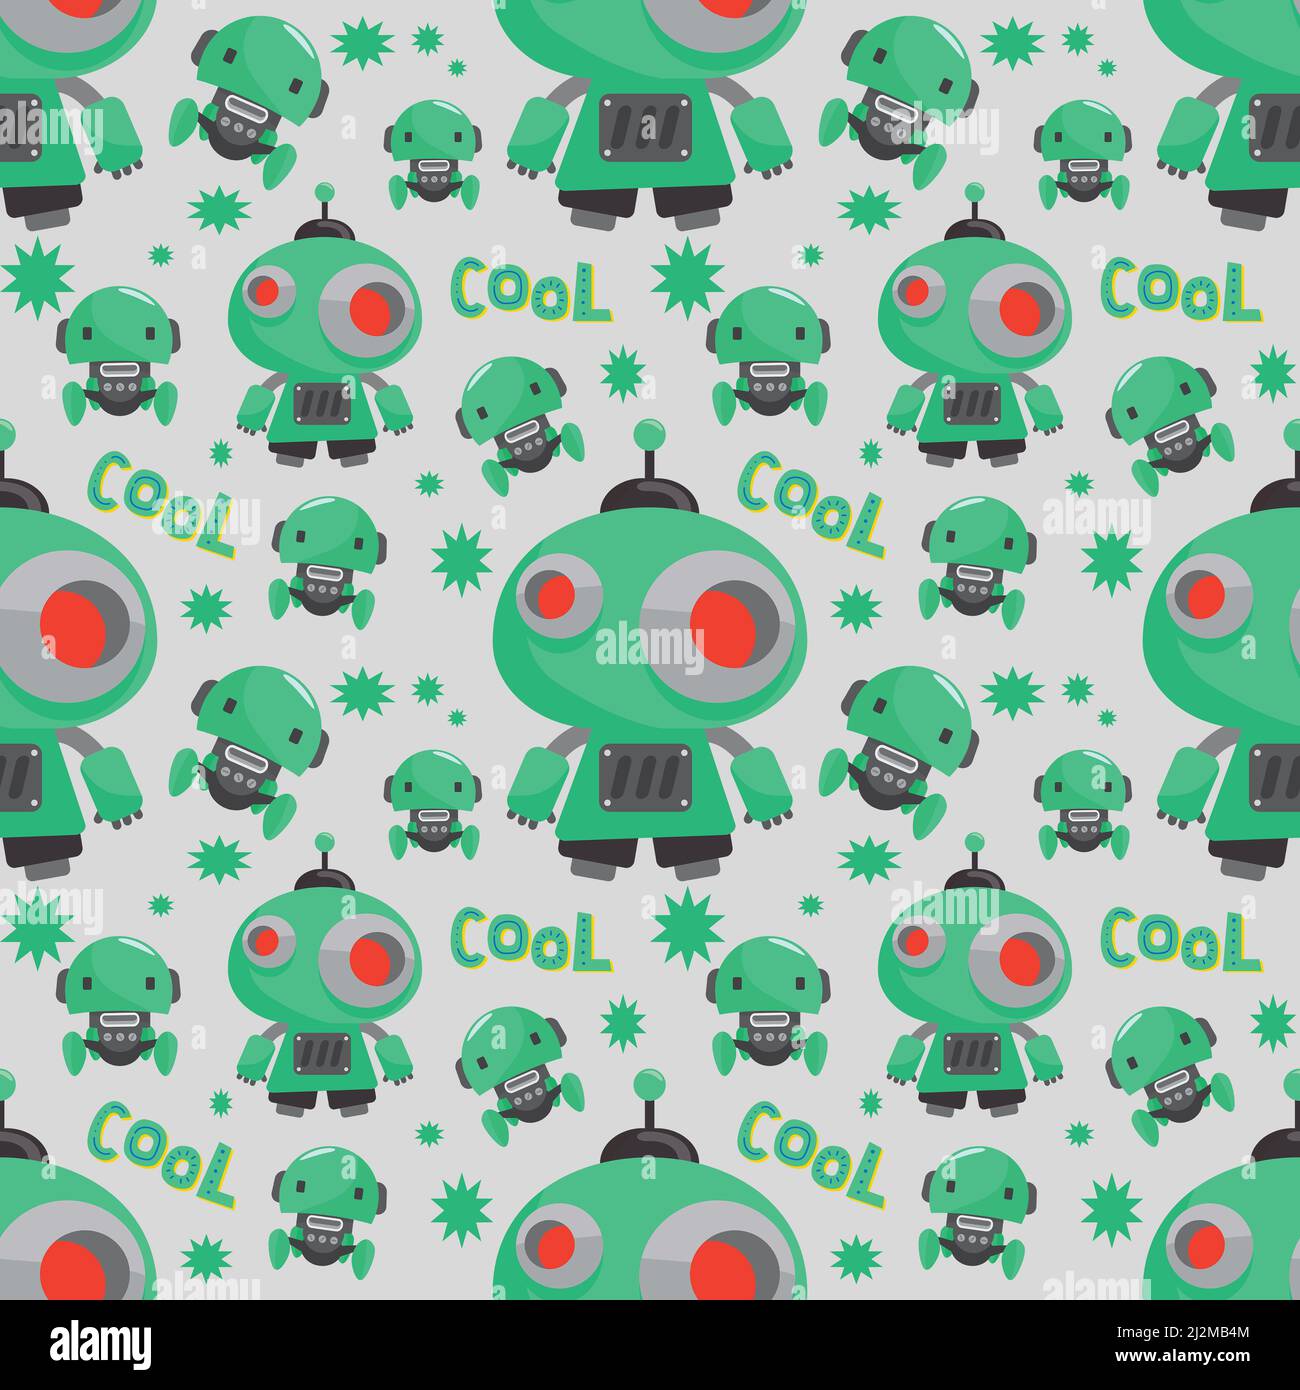 Little green robot seamless pattern on gray background for robotics and technology fans in this cute design element. Stock Photo